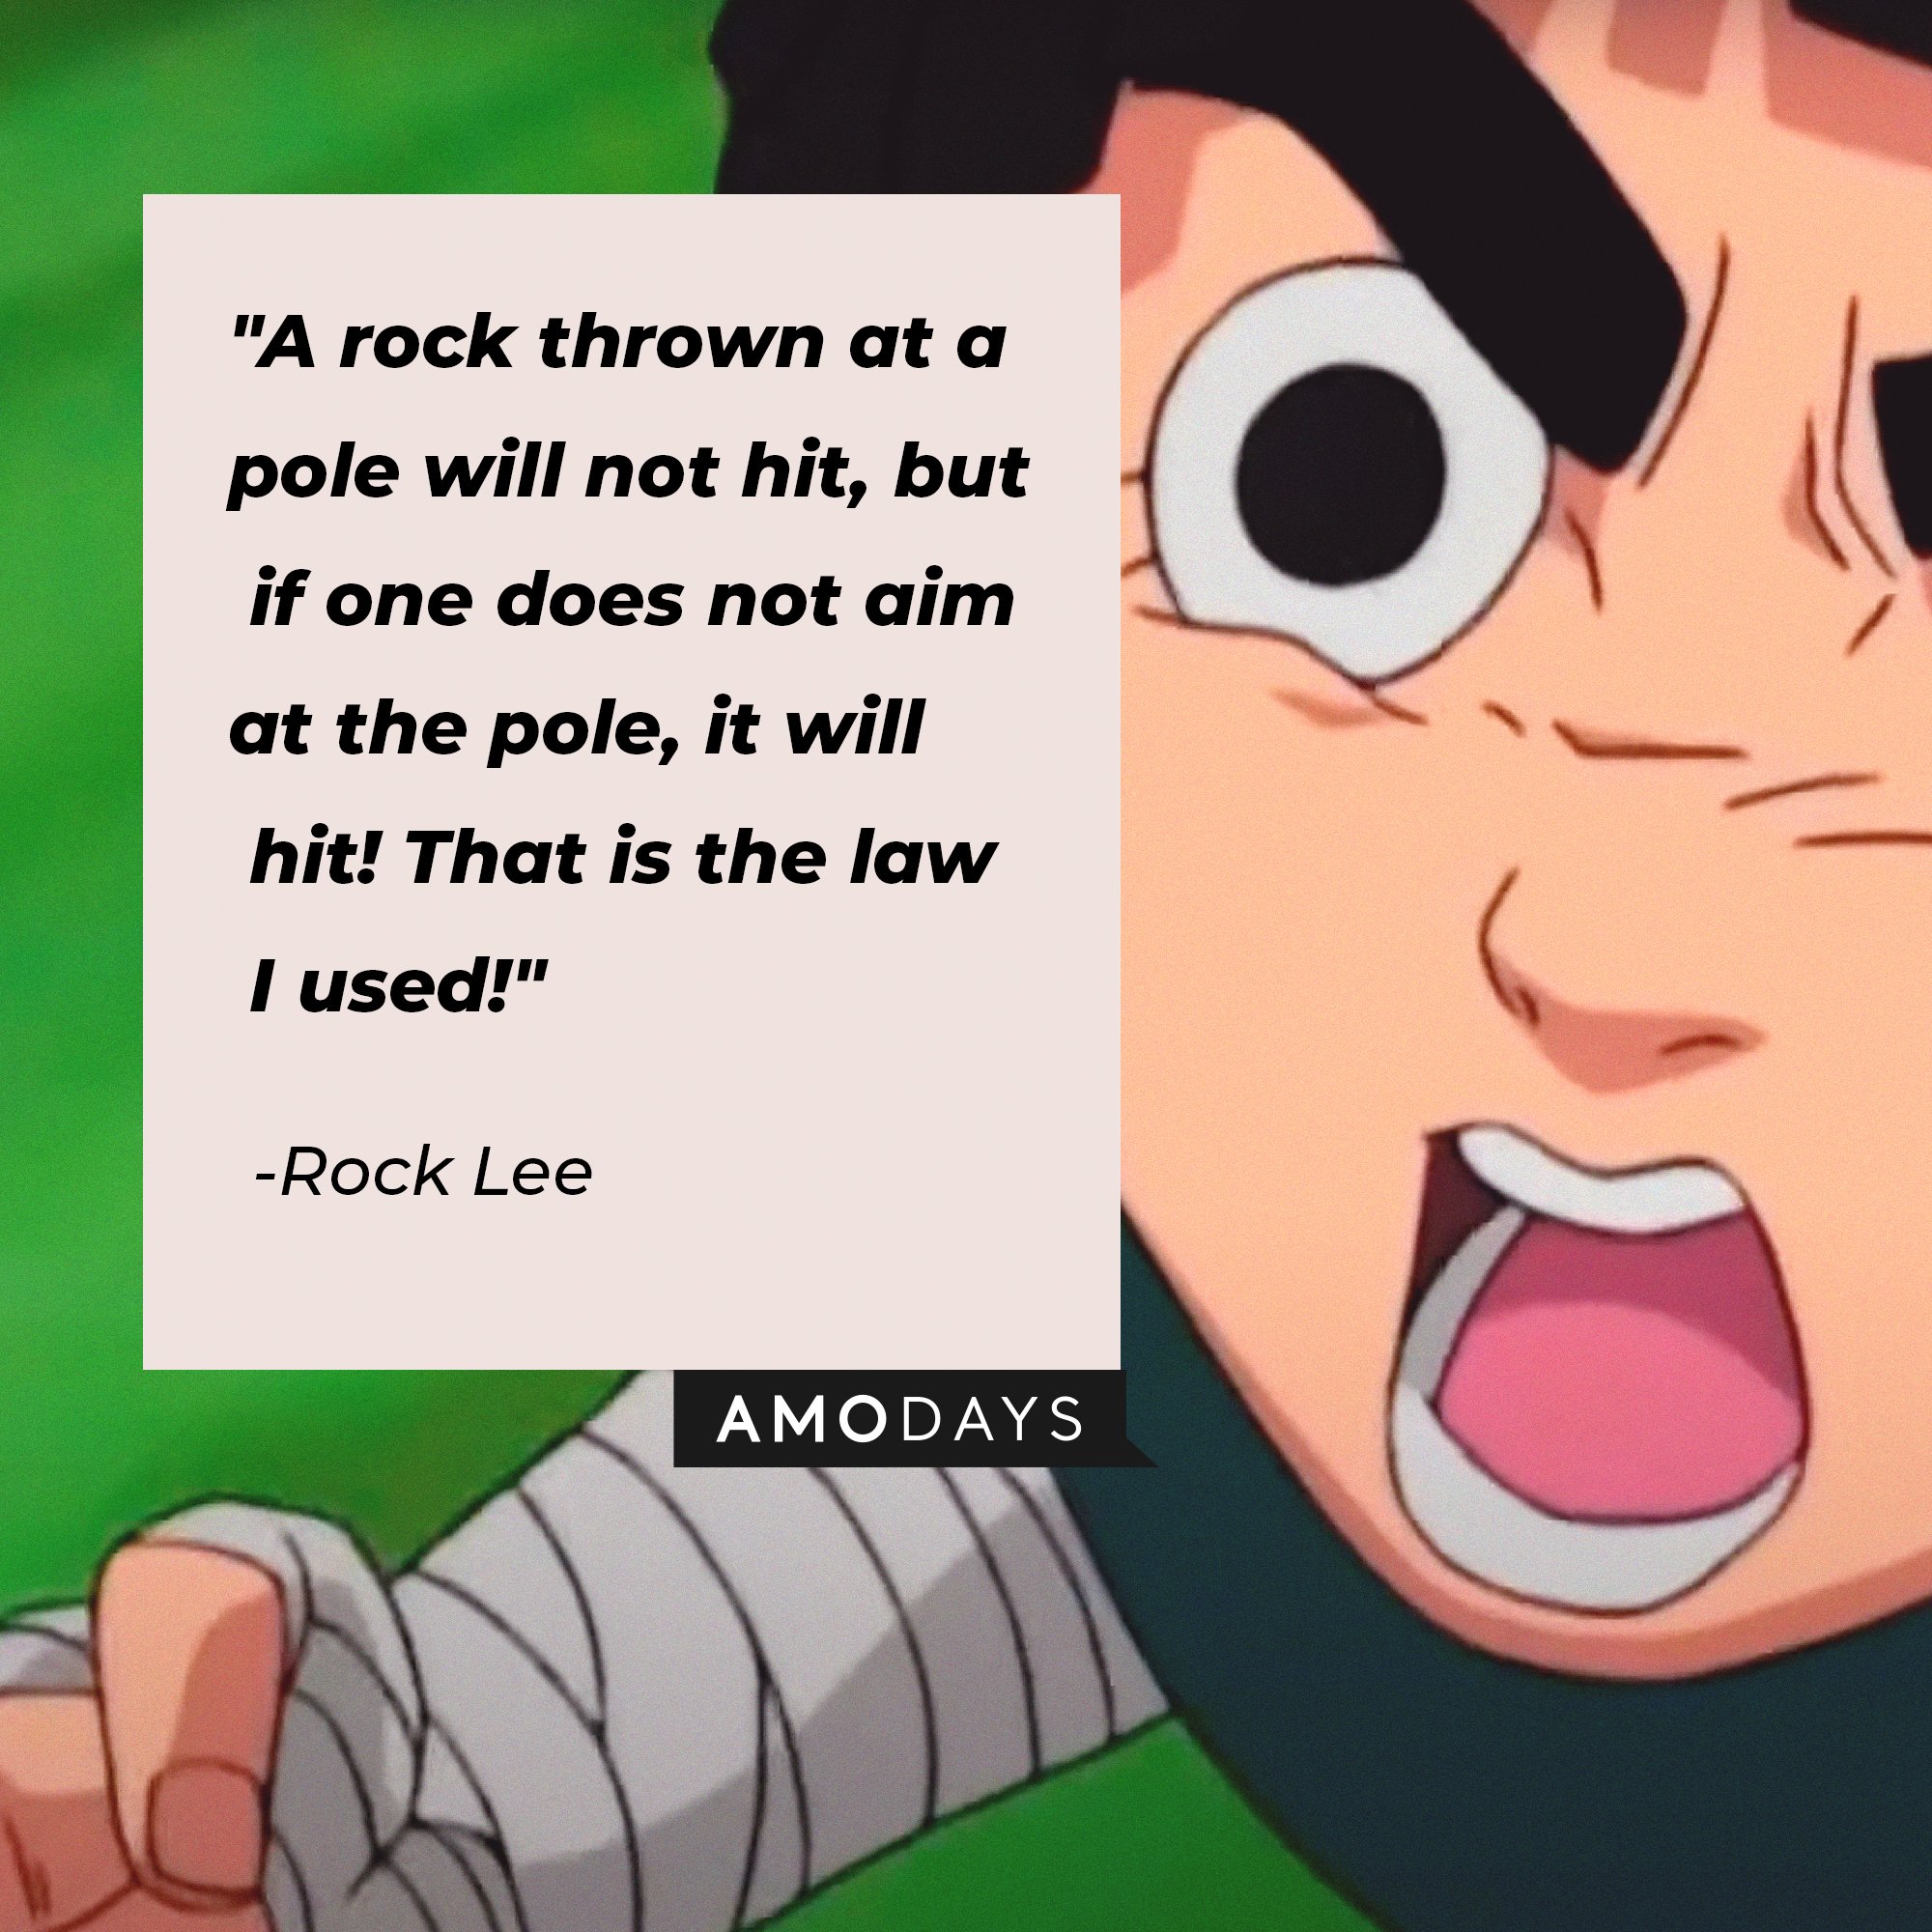 Rock Lee's quote: "A rock thrown at a pole will not hit, but if one does not aim at the pole, it will hit! That is the law I used!" | Image: AmoDays